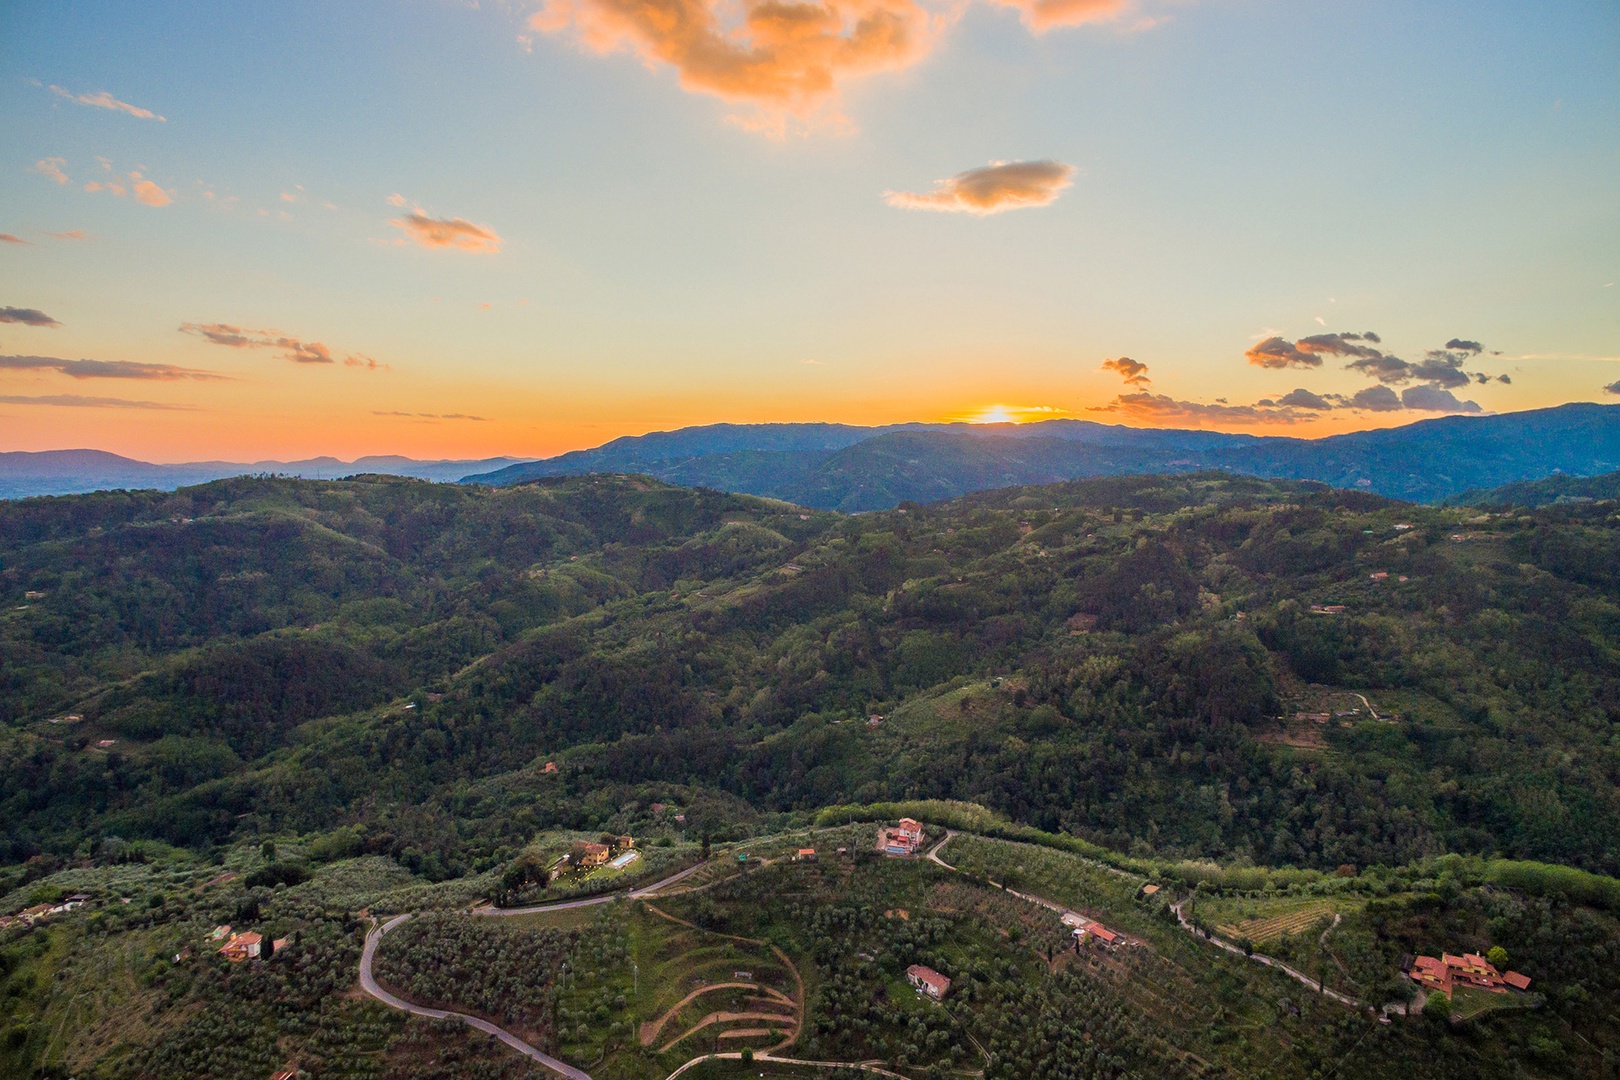 Breathtaking views overlooking the Tuscan countryside.